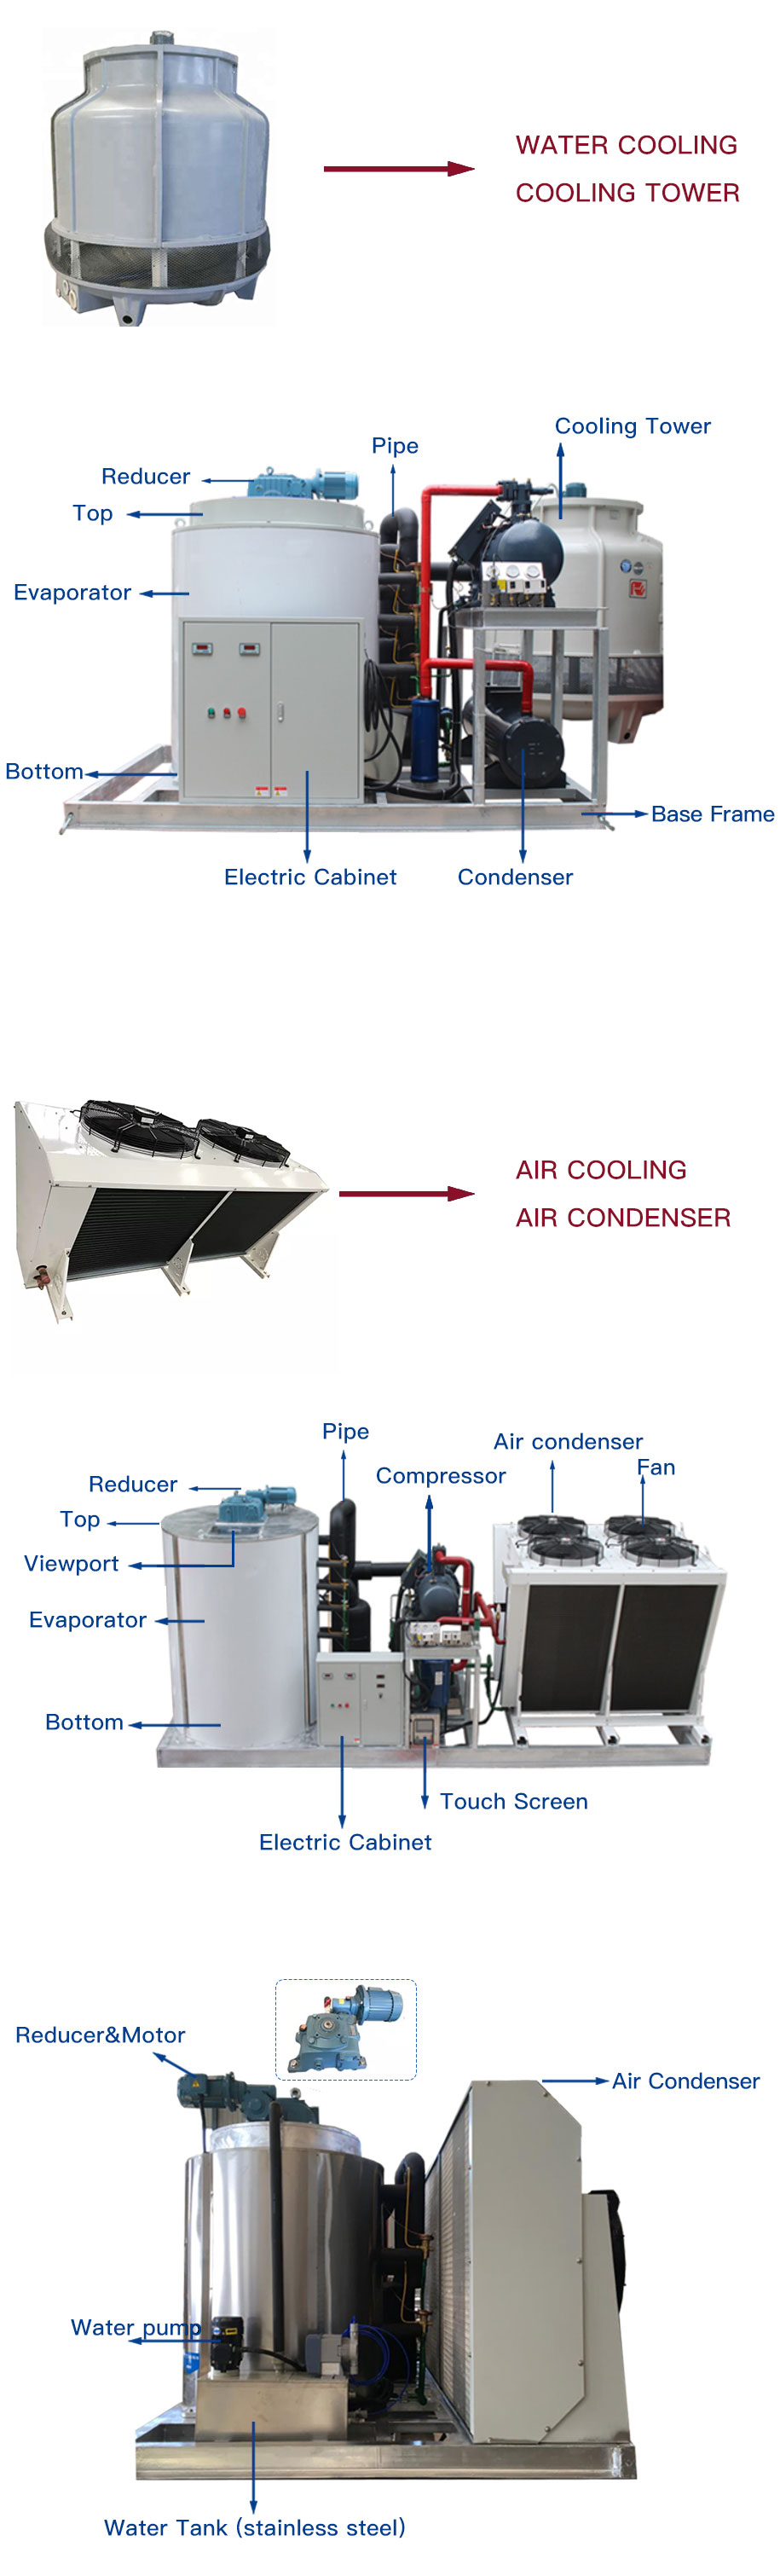 water-cooling-and-air-cooling